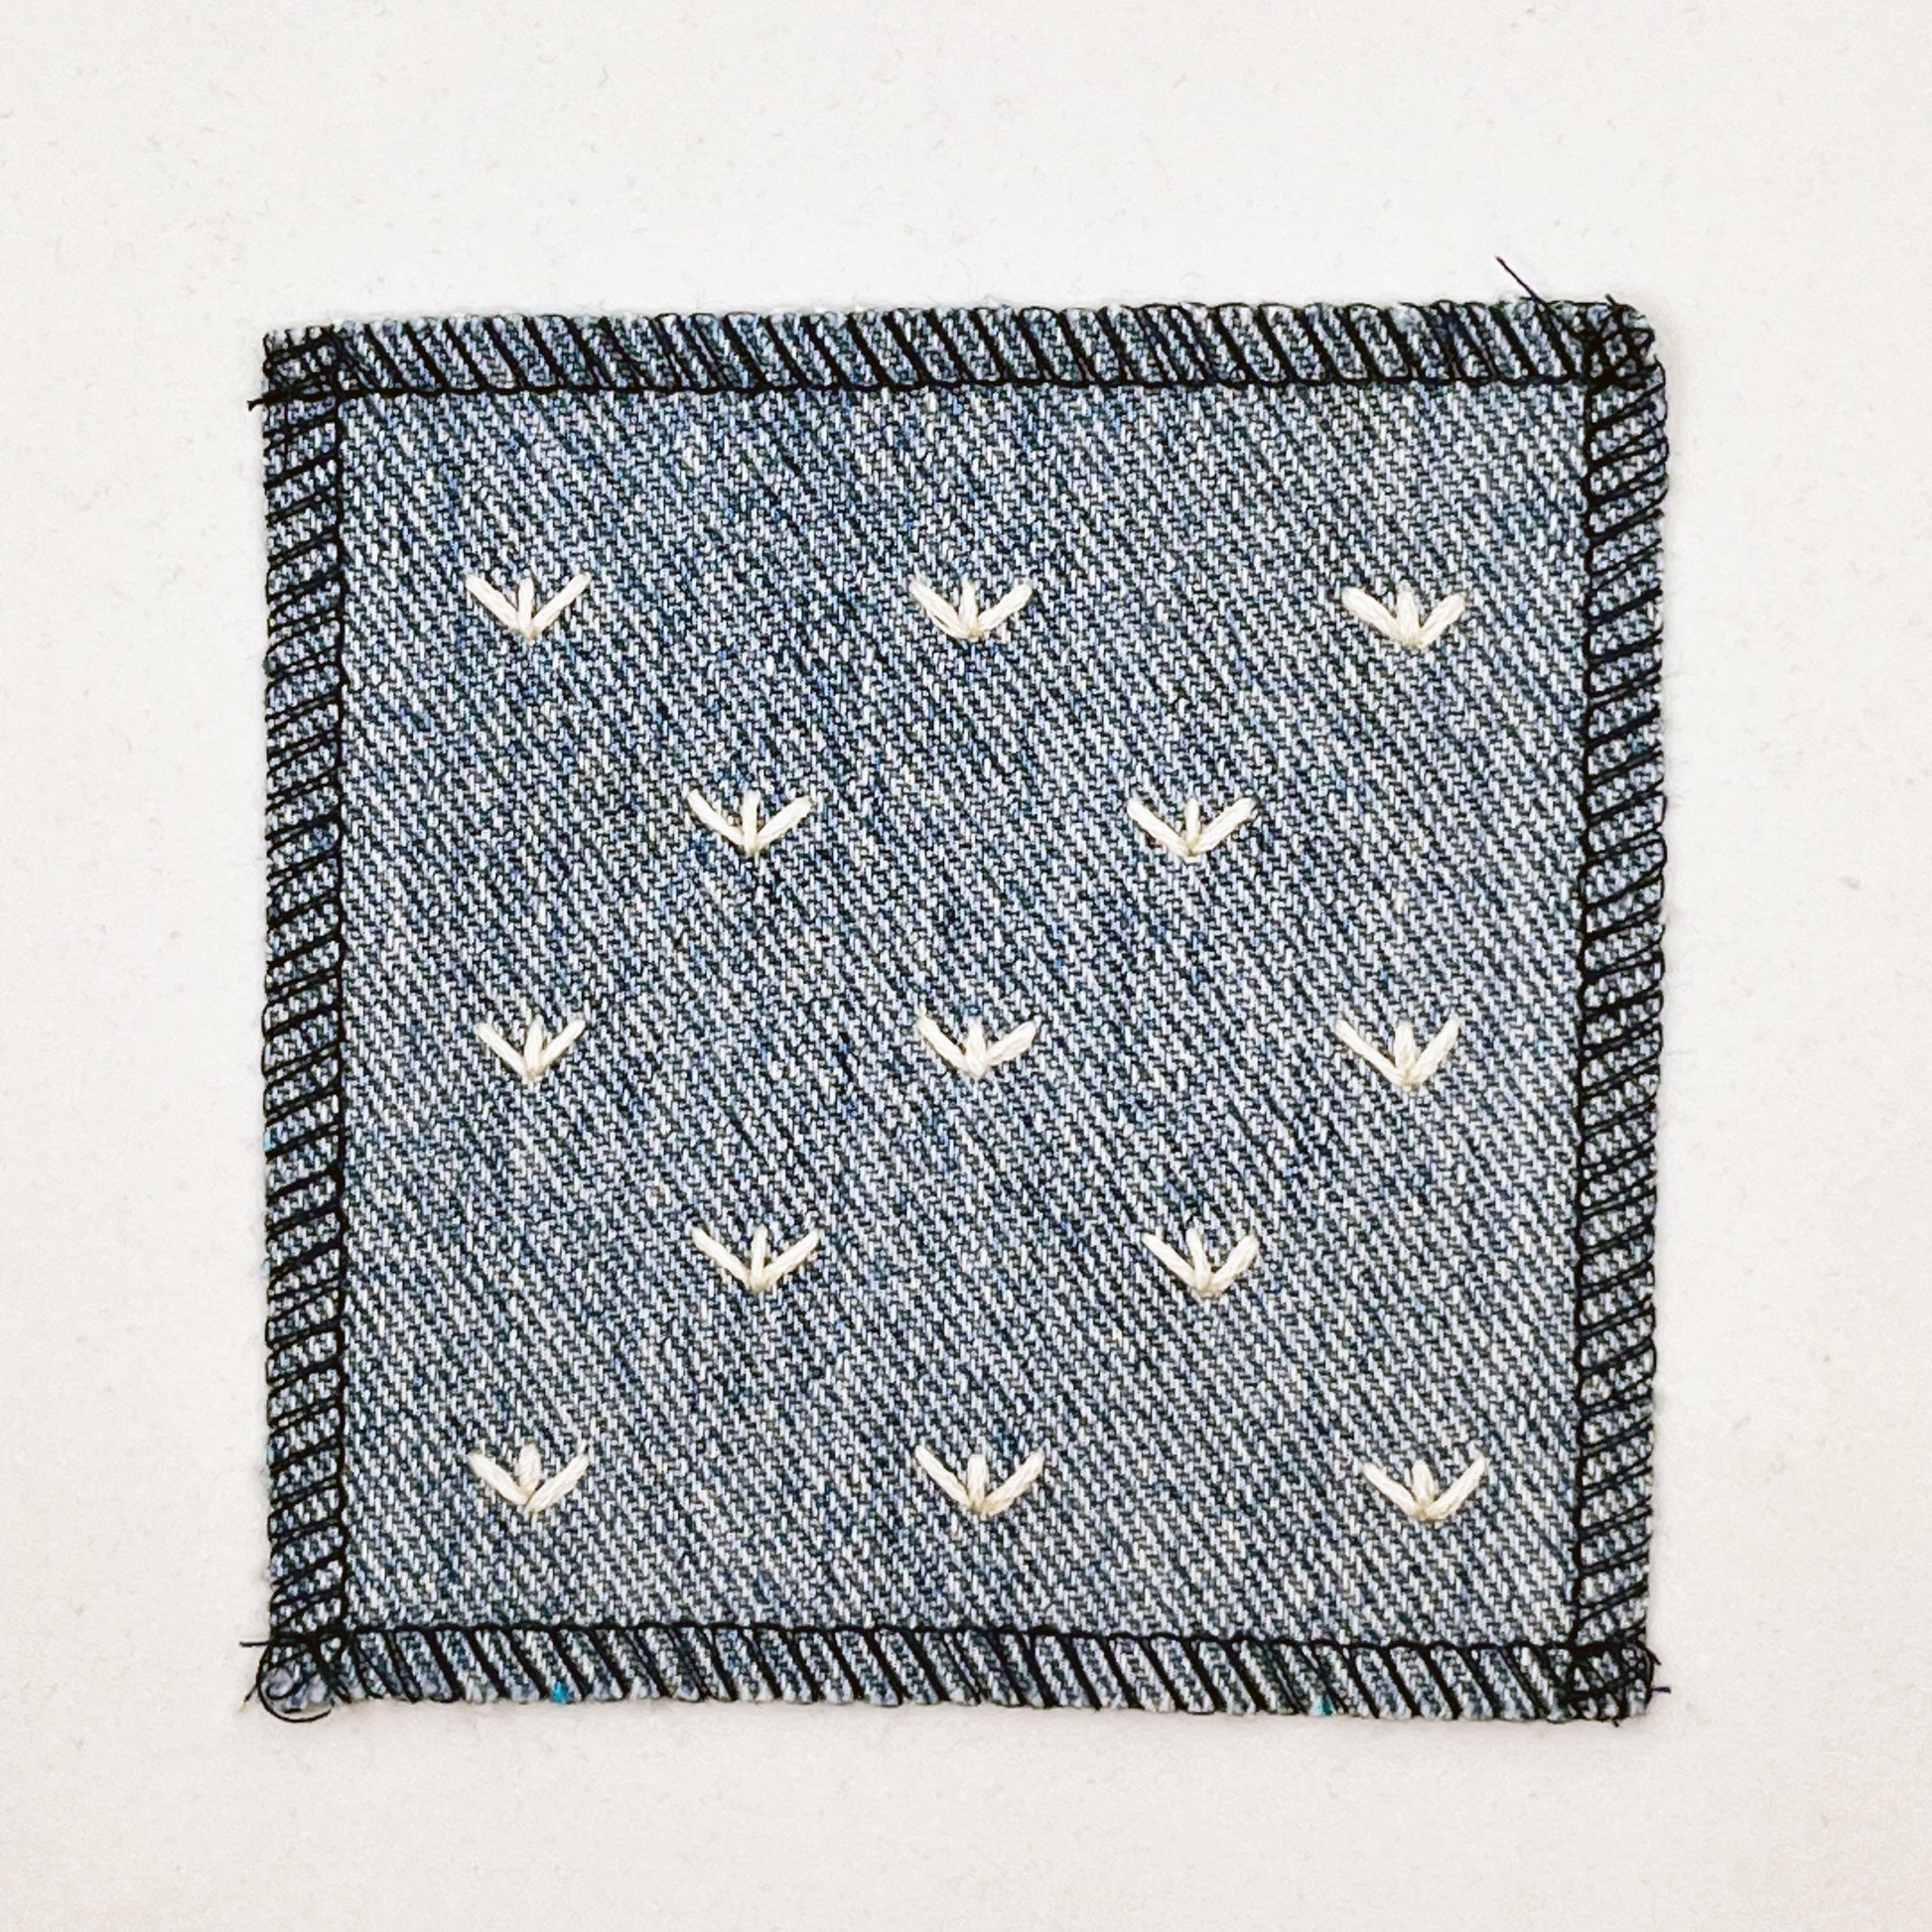 a square denim patch, with ivory stitches that look like birds feet or sprouts spread out in a diamond pattern, with overlocked edges